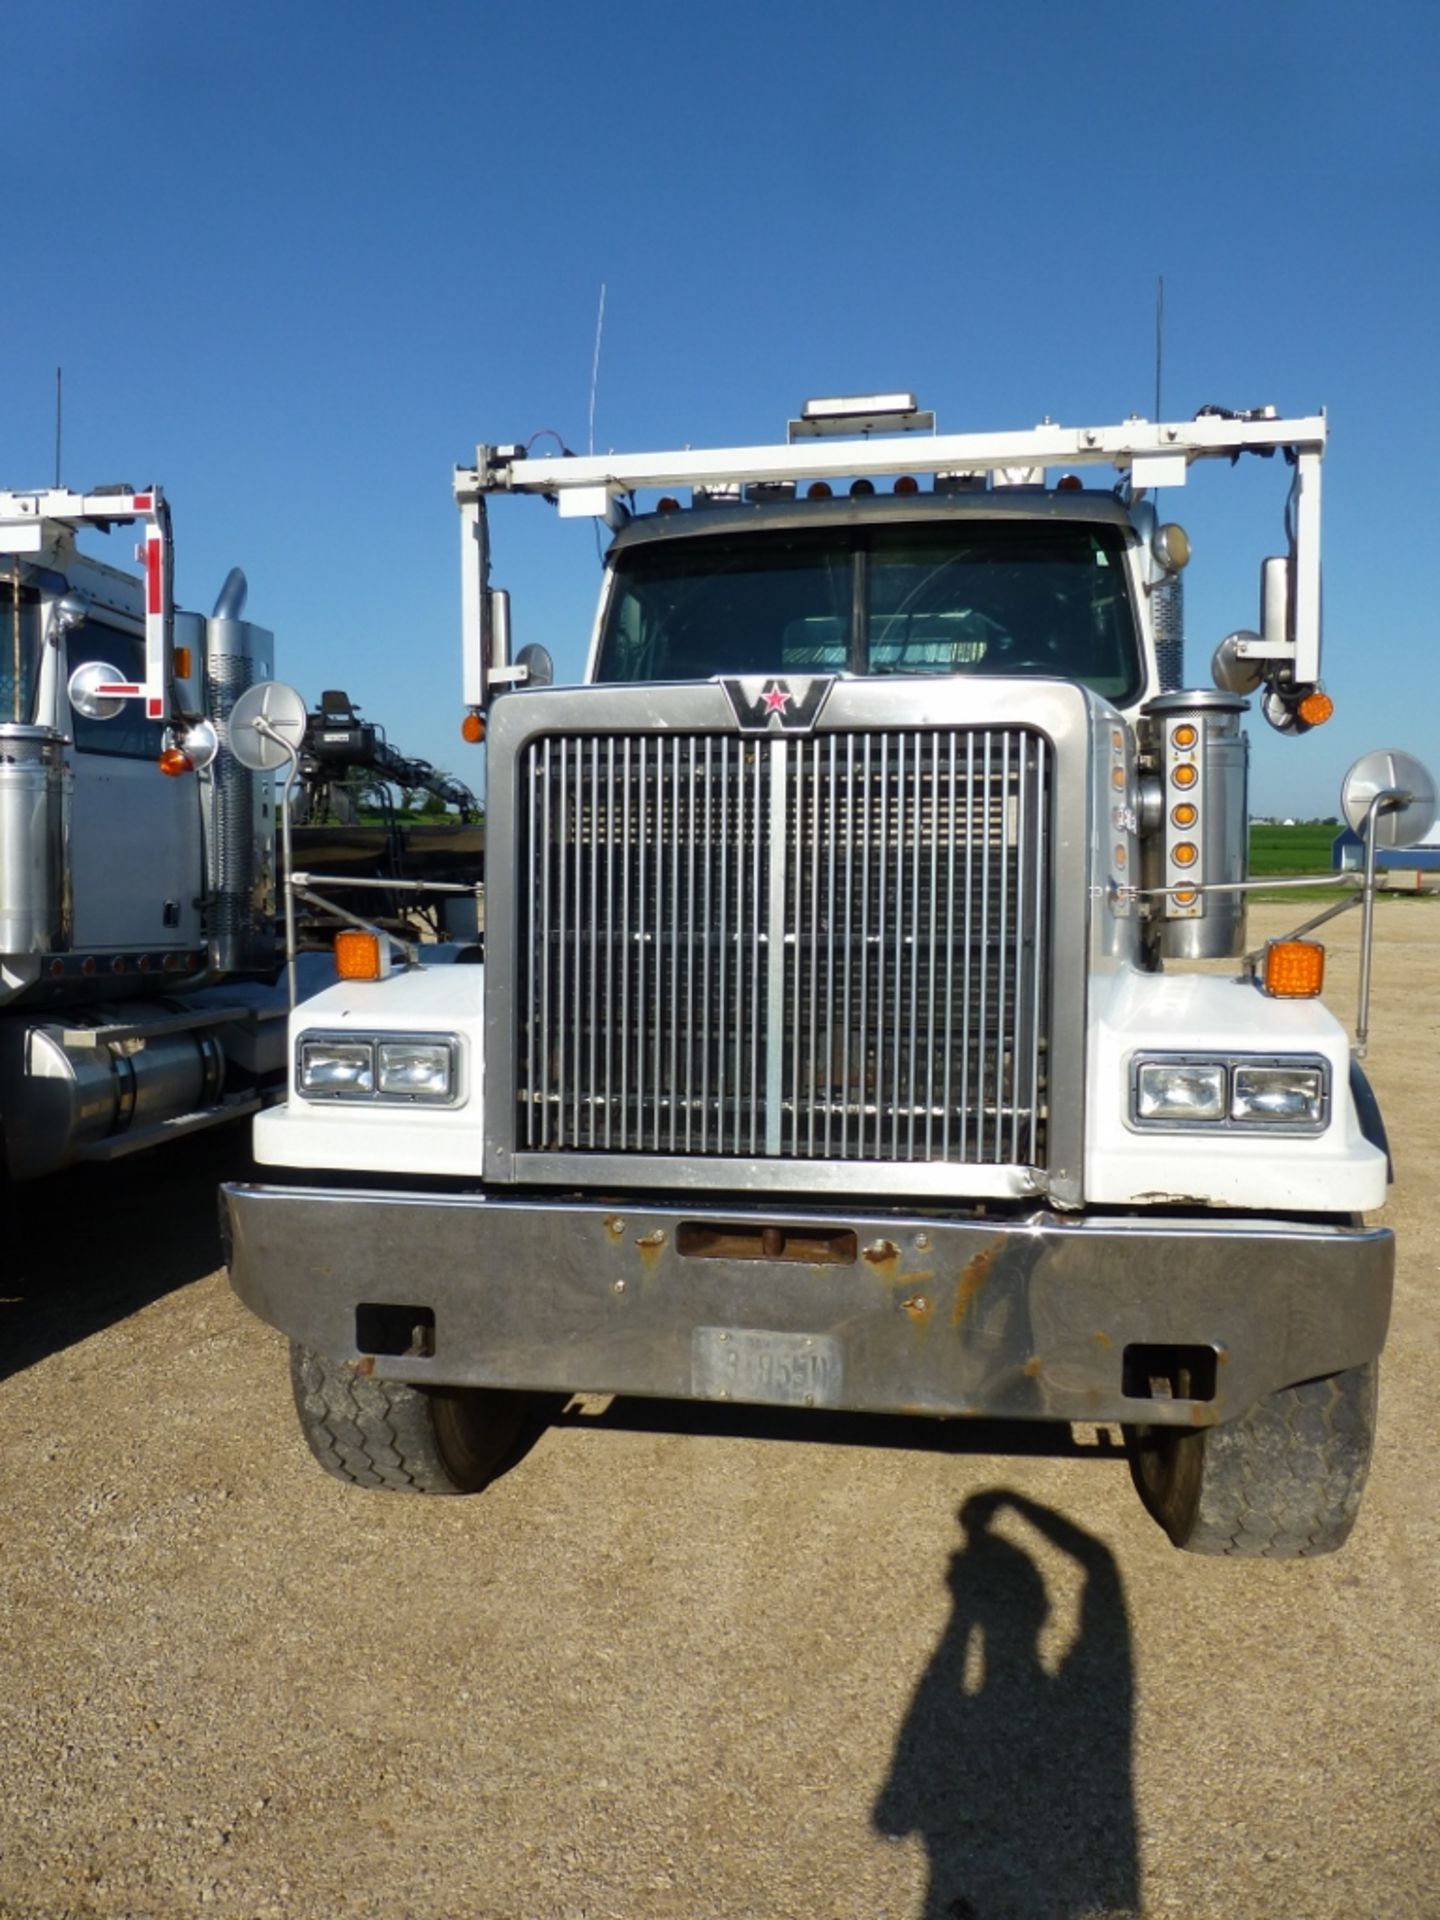 2006 Freightliner Western Star 4900EX, Heavy Haul Day cab, 3 axle, Eaton Fuller H/L 18 spd trans, - Image 2 of 26